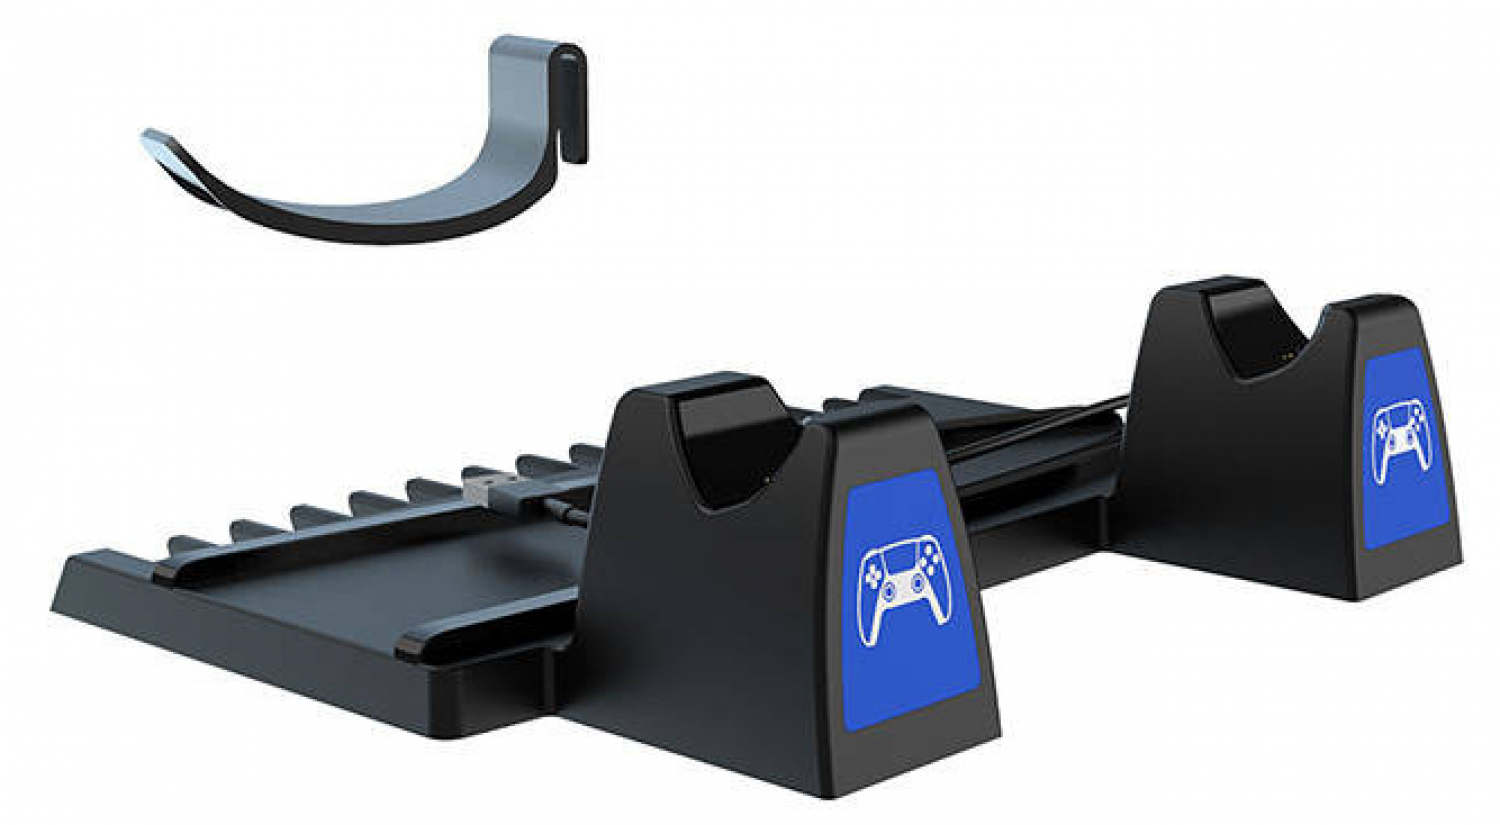 Statīvs iPega Multifunctional Cooling Stand for PS5 and Accessories Black (PG-P5009)